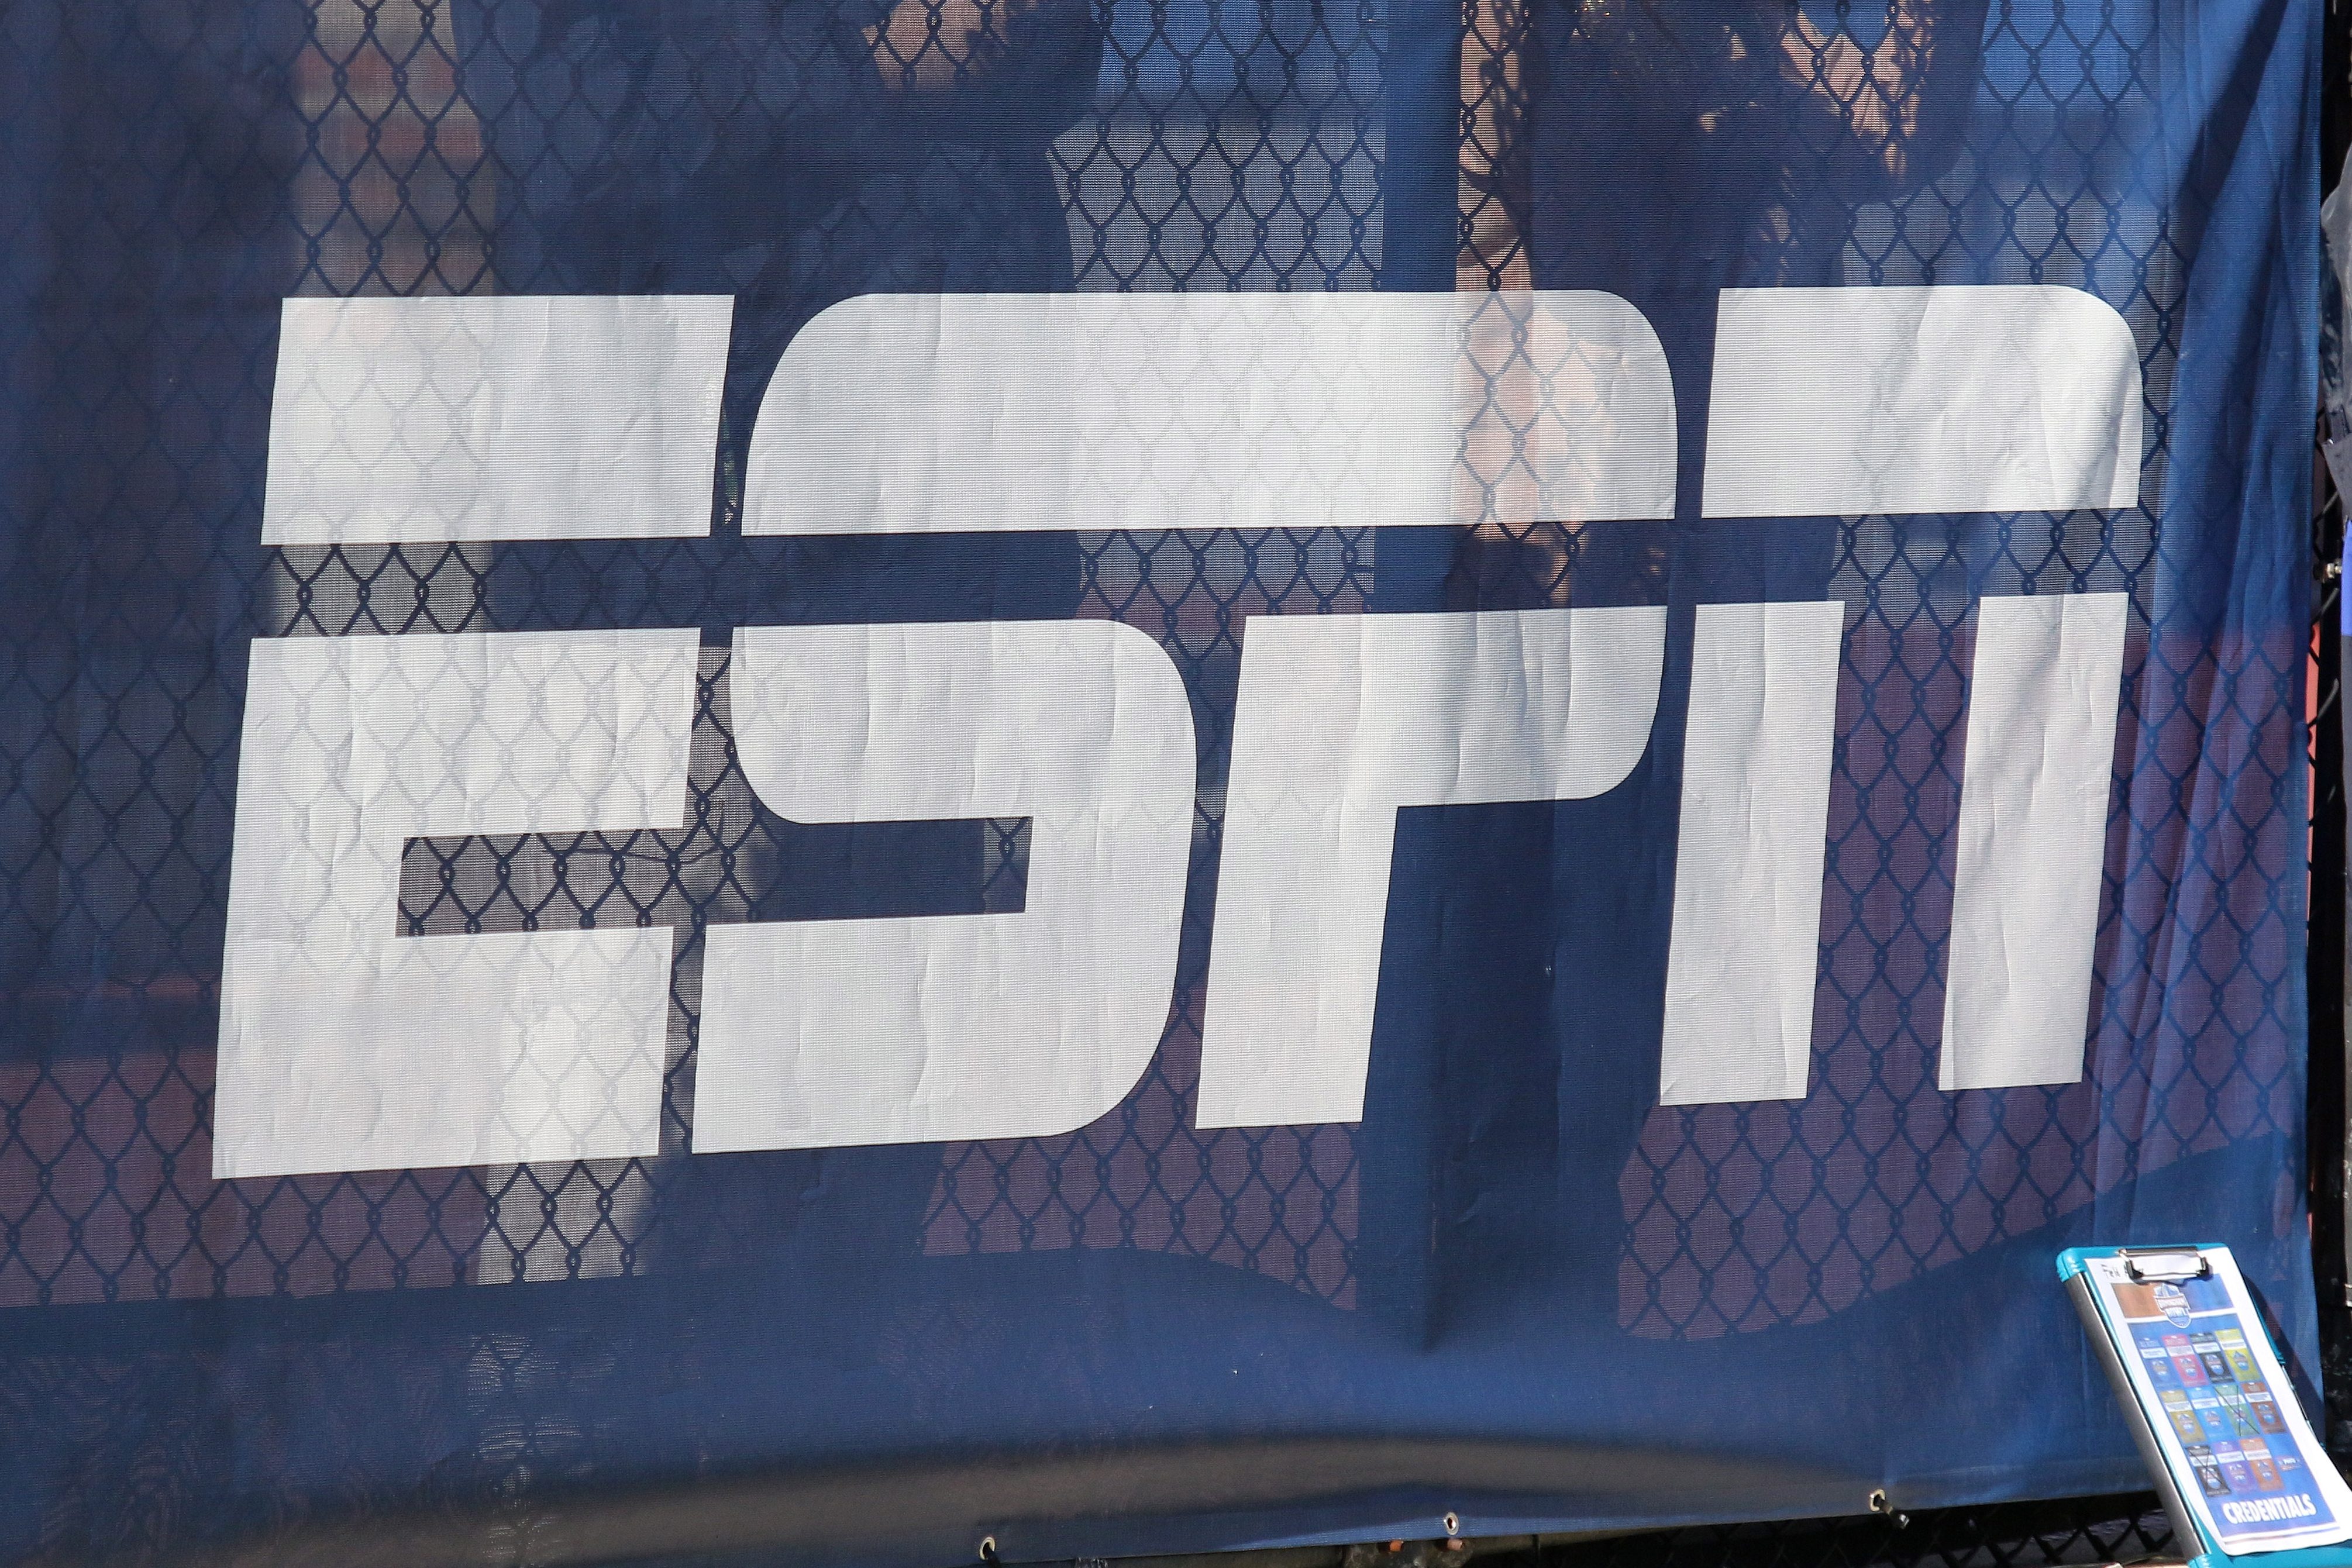 The ESPN logo on display at the Birmingham Bowl in 2018